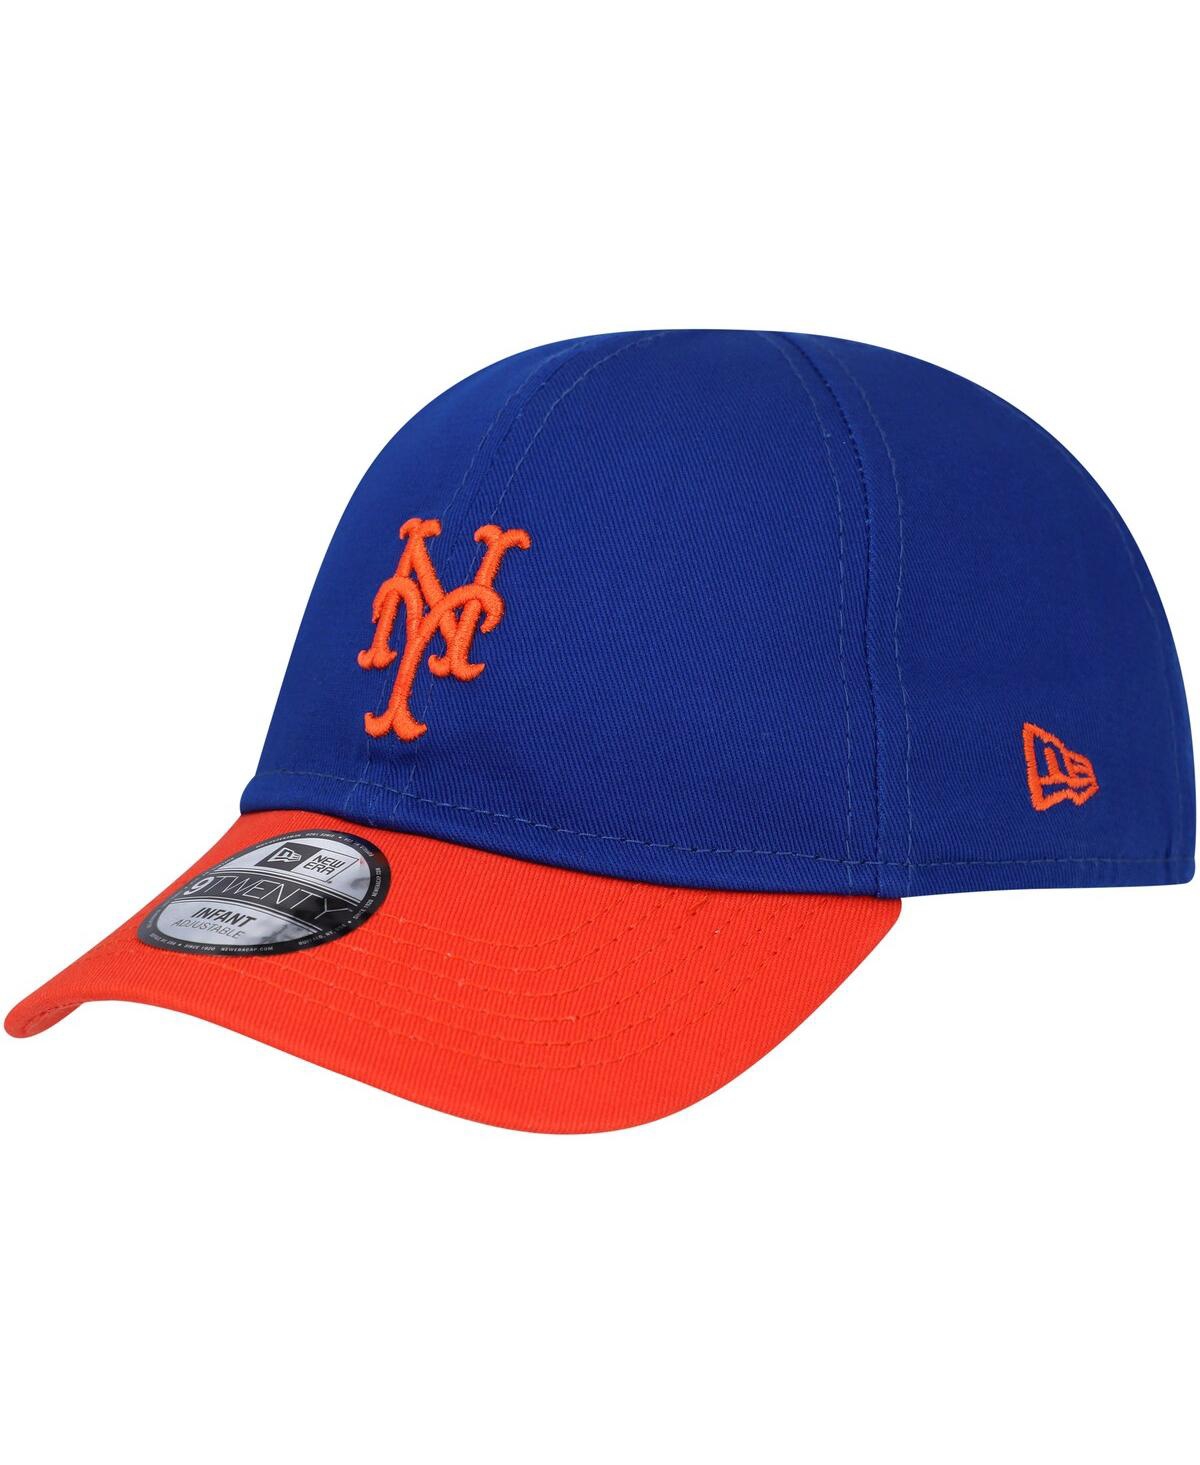 New Era Babies' Infant Unisex  Royal New York Mets My First 9fifty Hat